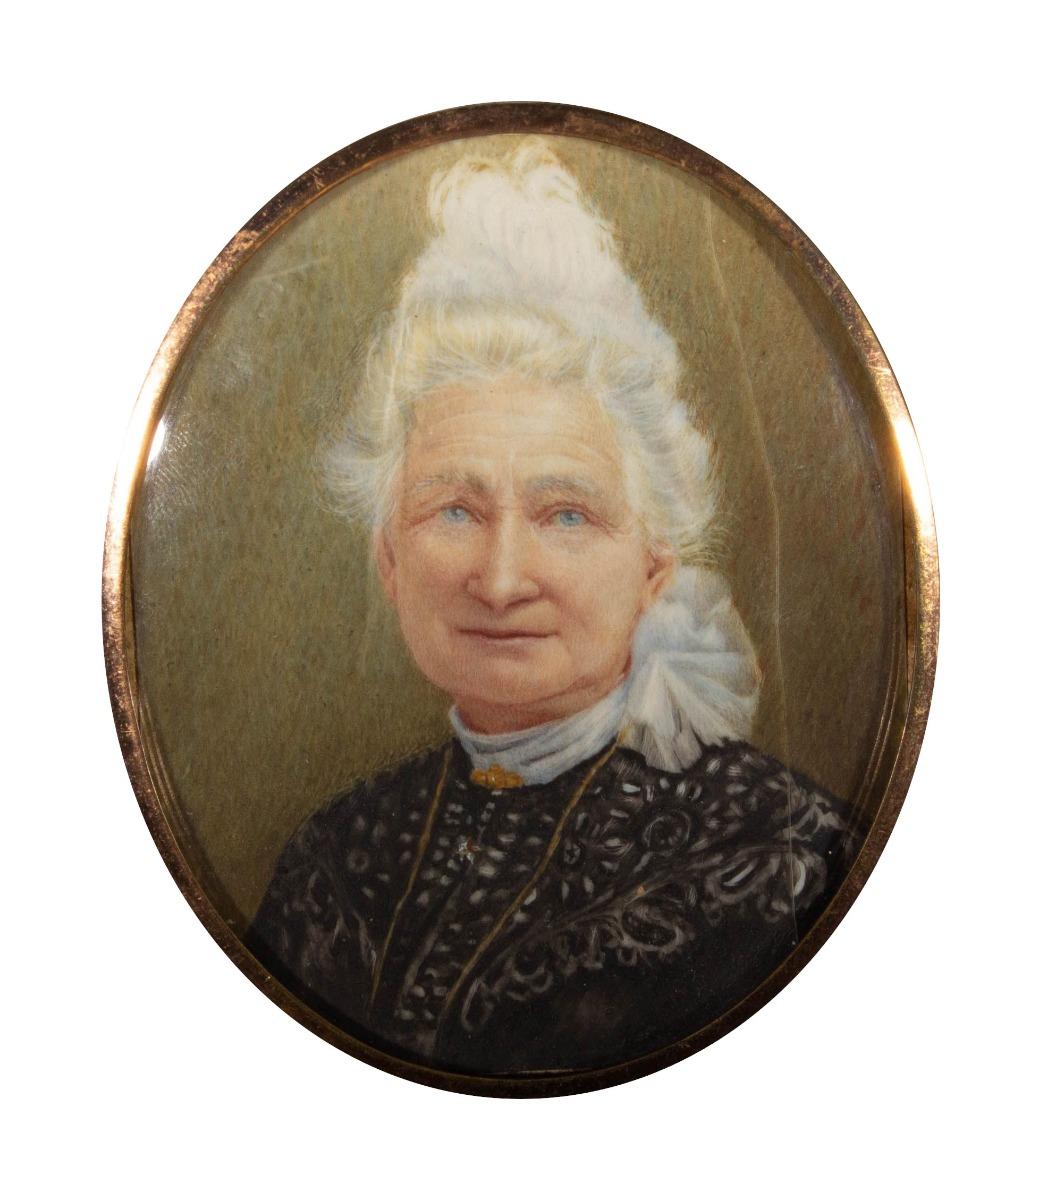 A truly exquisite miniature Victorian portrait of a gently smiling, older woman with fine, lace clothes and elegantly styled hair. The woman has strikingly piercing blue eyes and a warm, subtle smile. unlike many other portraits of older women of